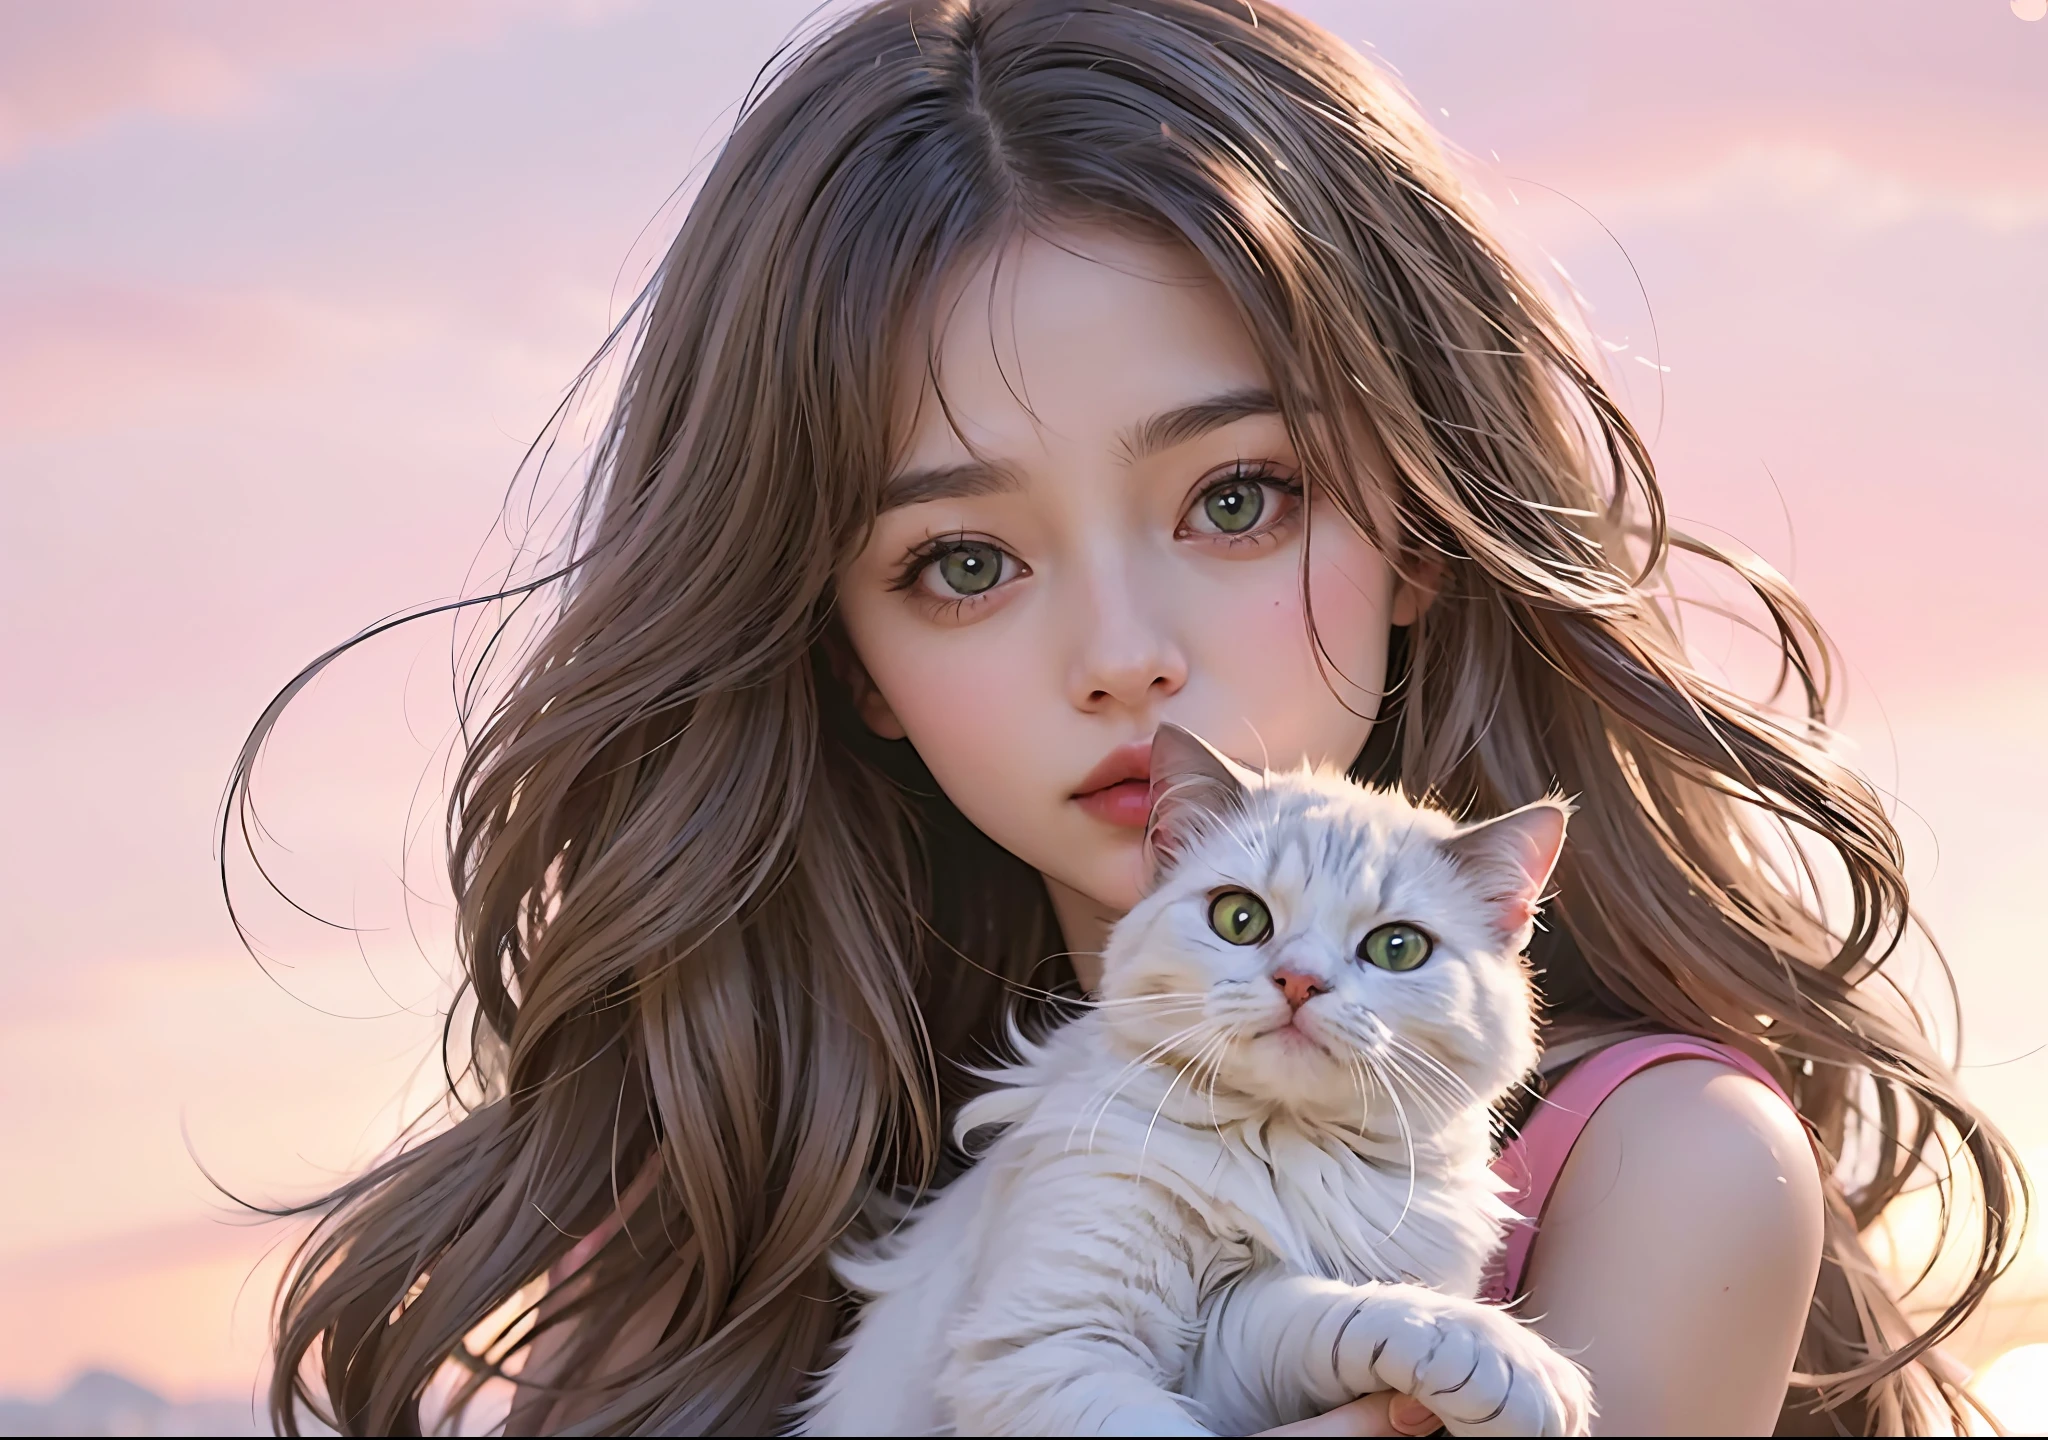 anime Chica with long hair holding a blanco gato in her arms, very beautiful cute gatoChica, beautiful anime gatoChica, cute anime gatoChica, guweiz, very beautiful anime gato Chica, Lindo estilo artístico, beautiful young gatoChica, blanco ( gato ) Chica, attractive gato Chica, obra de arte al estilo de guweiz, blanco gato Chica, anime gatoChica